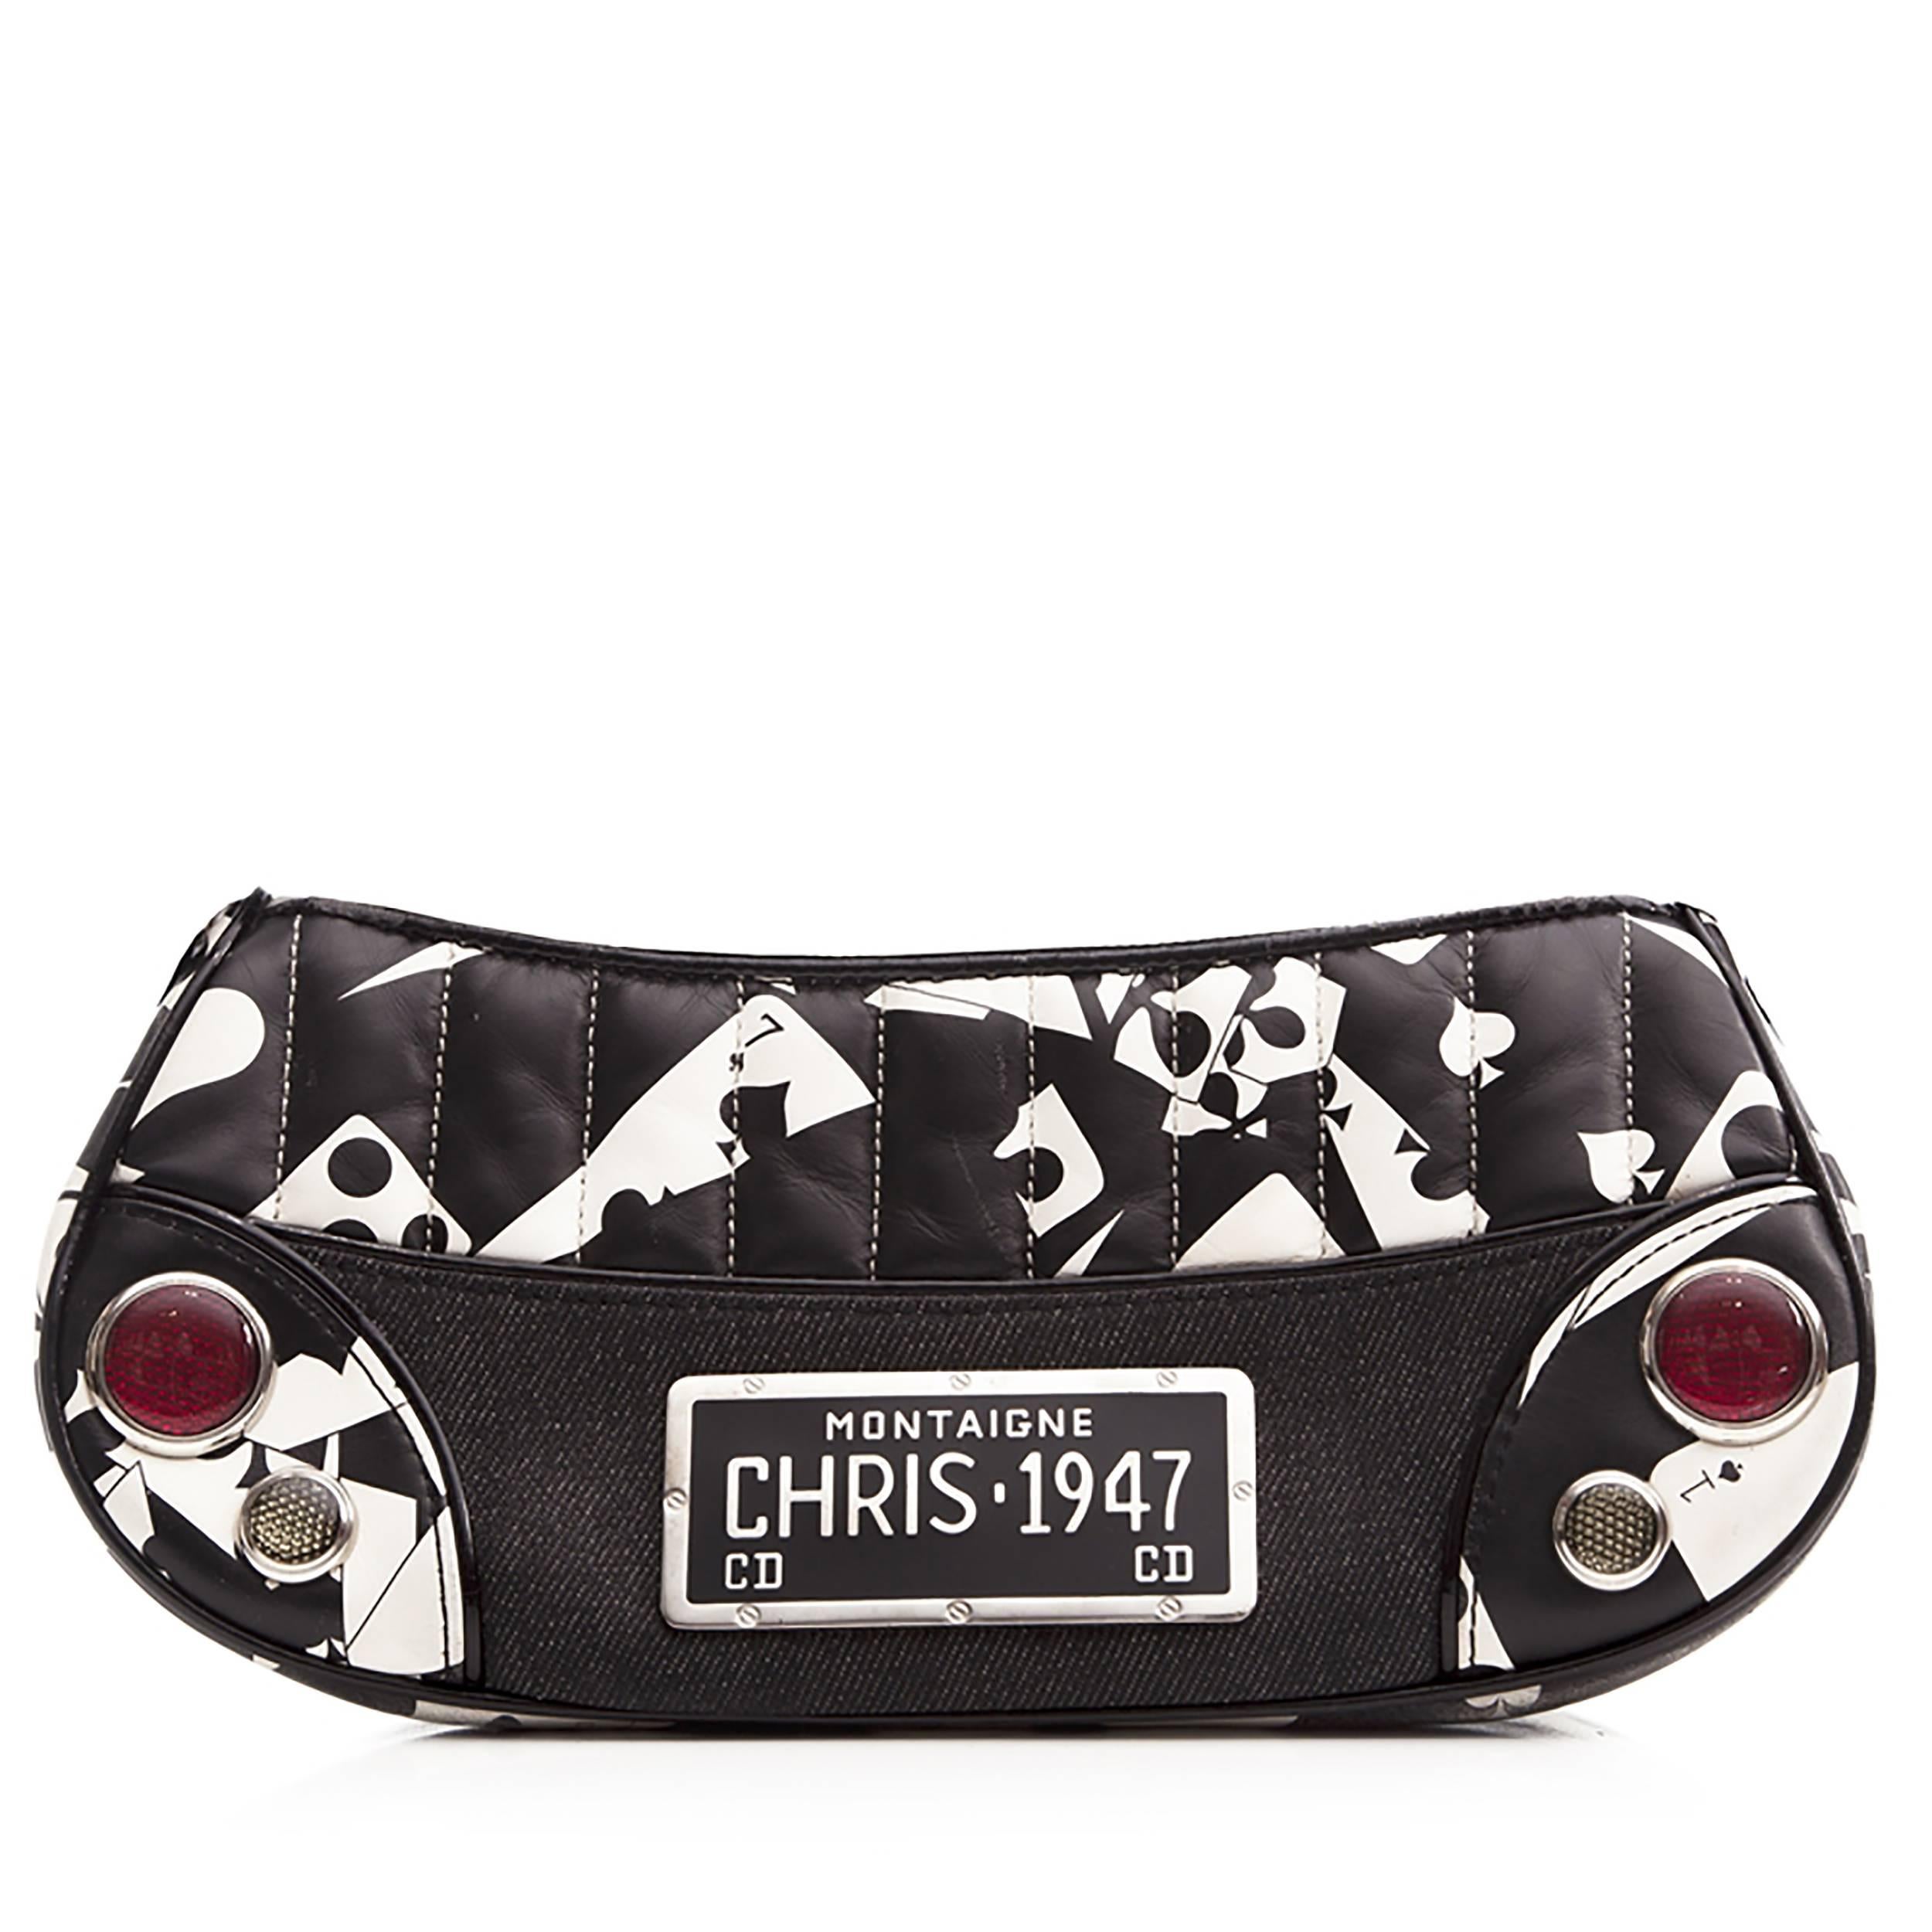 This playing-card patterned bag from Christian Dior is an ace accessory. Its denim and quilted leather exterior is finished with a black patent strap, and a metal Christian Dior plaque placed front and centre. Its interior holds one zipped